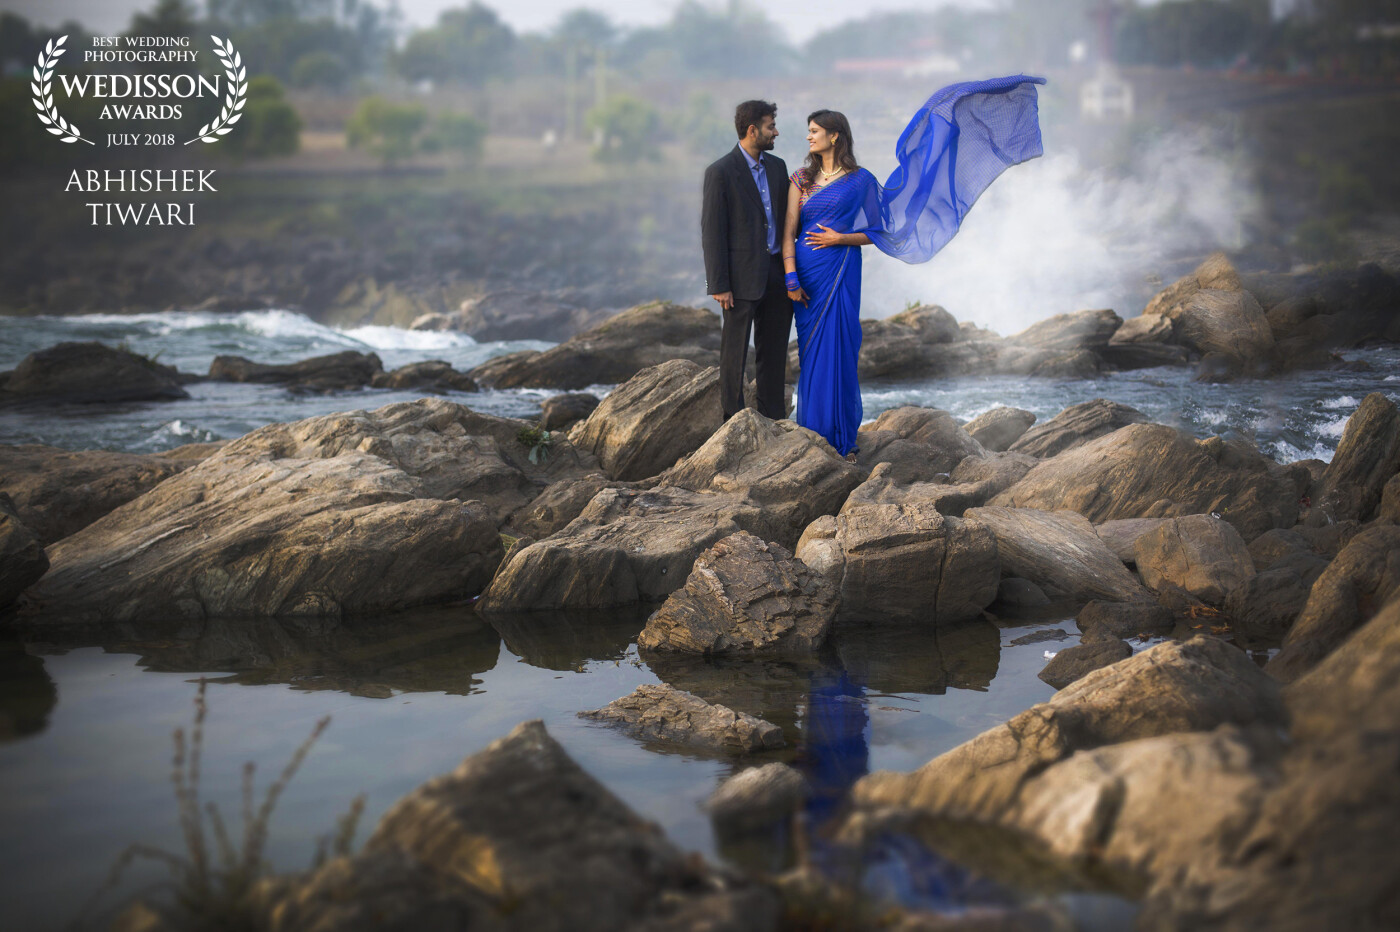 Simplicity at its best at the mesmerizing falls at Bhedaghat. It seemed like a perfect set-up at the gushing stream and a simple blue saree worn by Arushi. Sometimes it works the best when you don't have a plan & you 'go with the flow' in this image literally so!